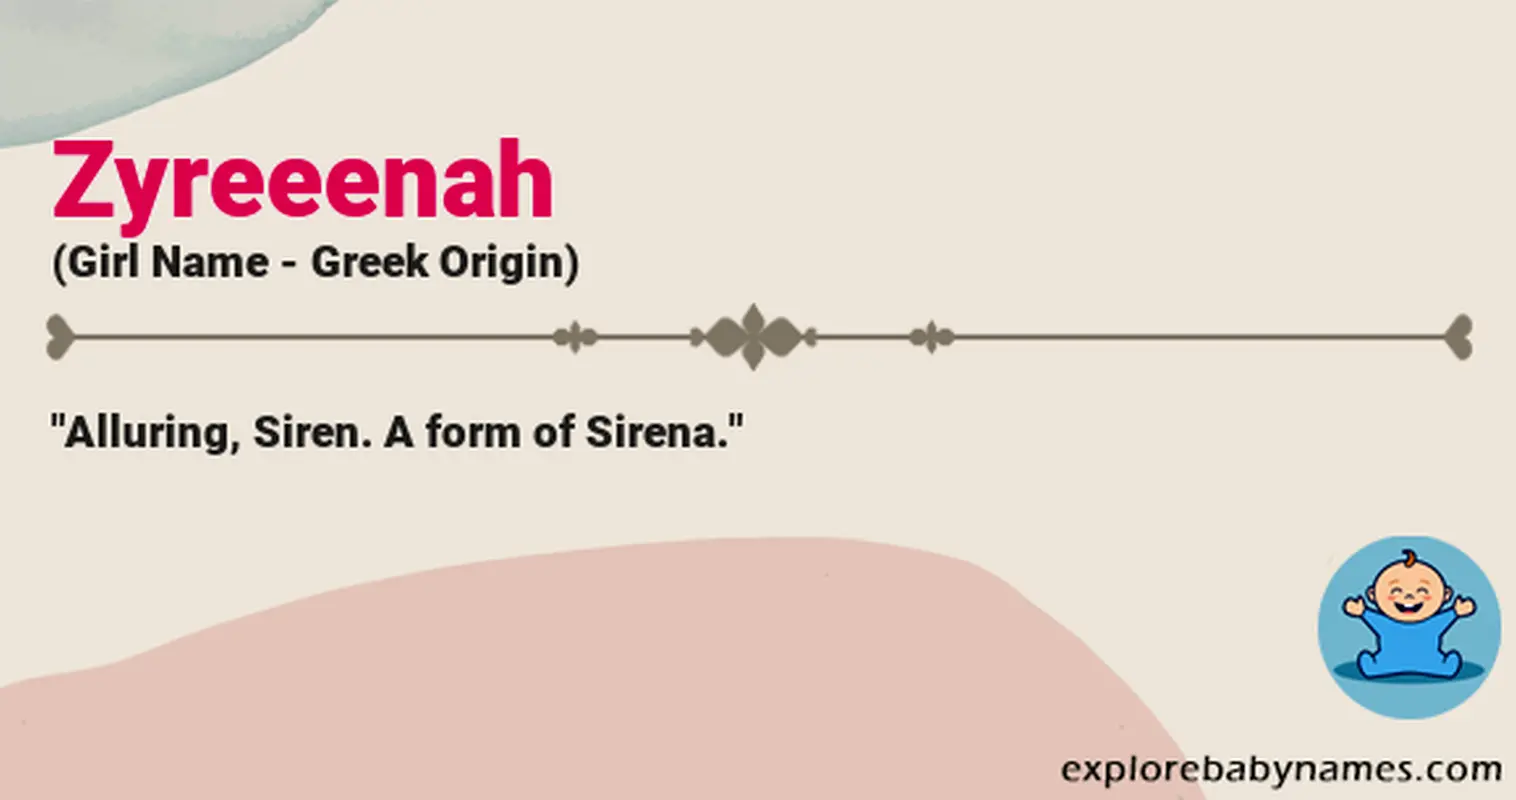 Meaning of Zyreeenah